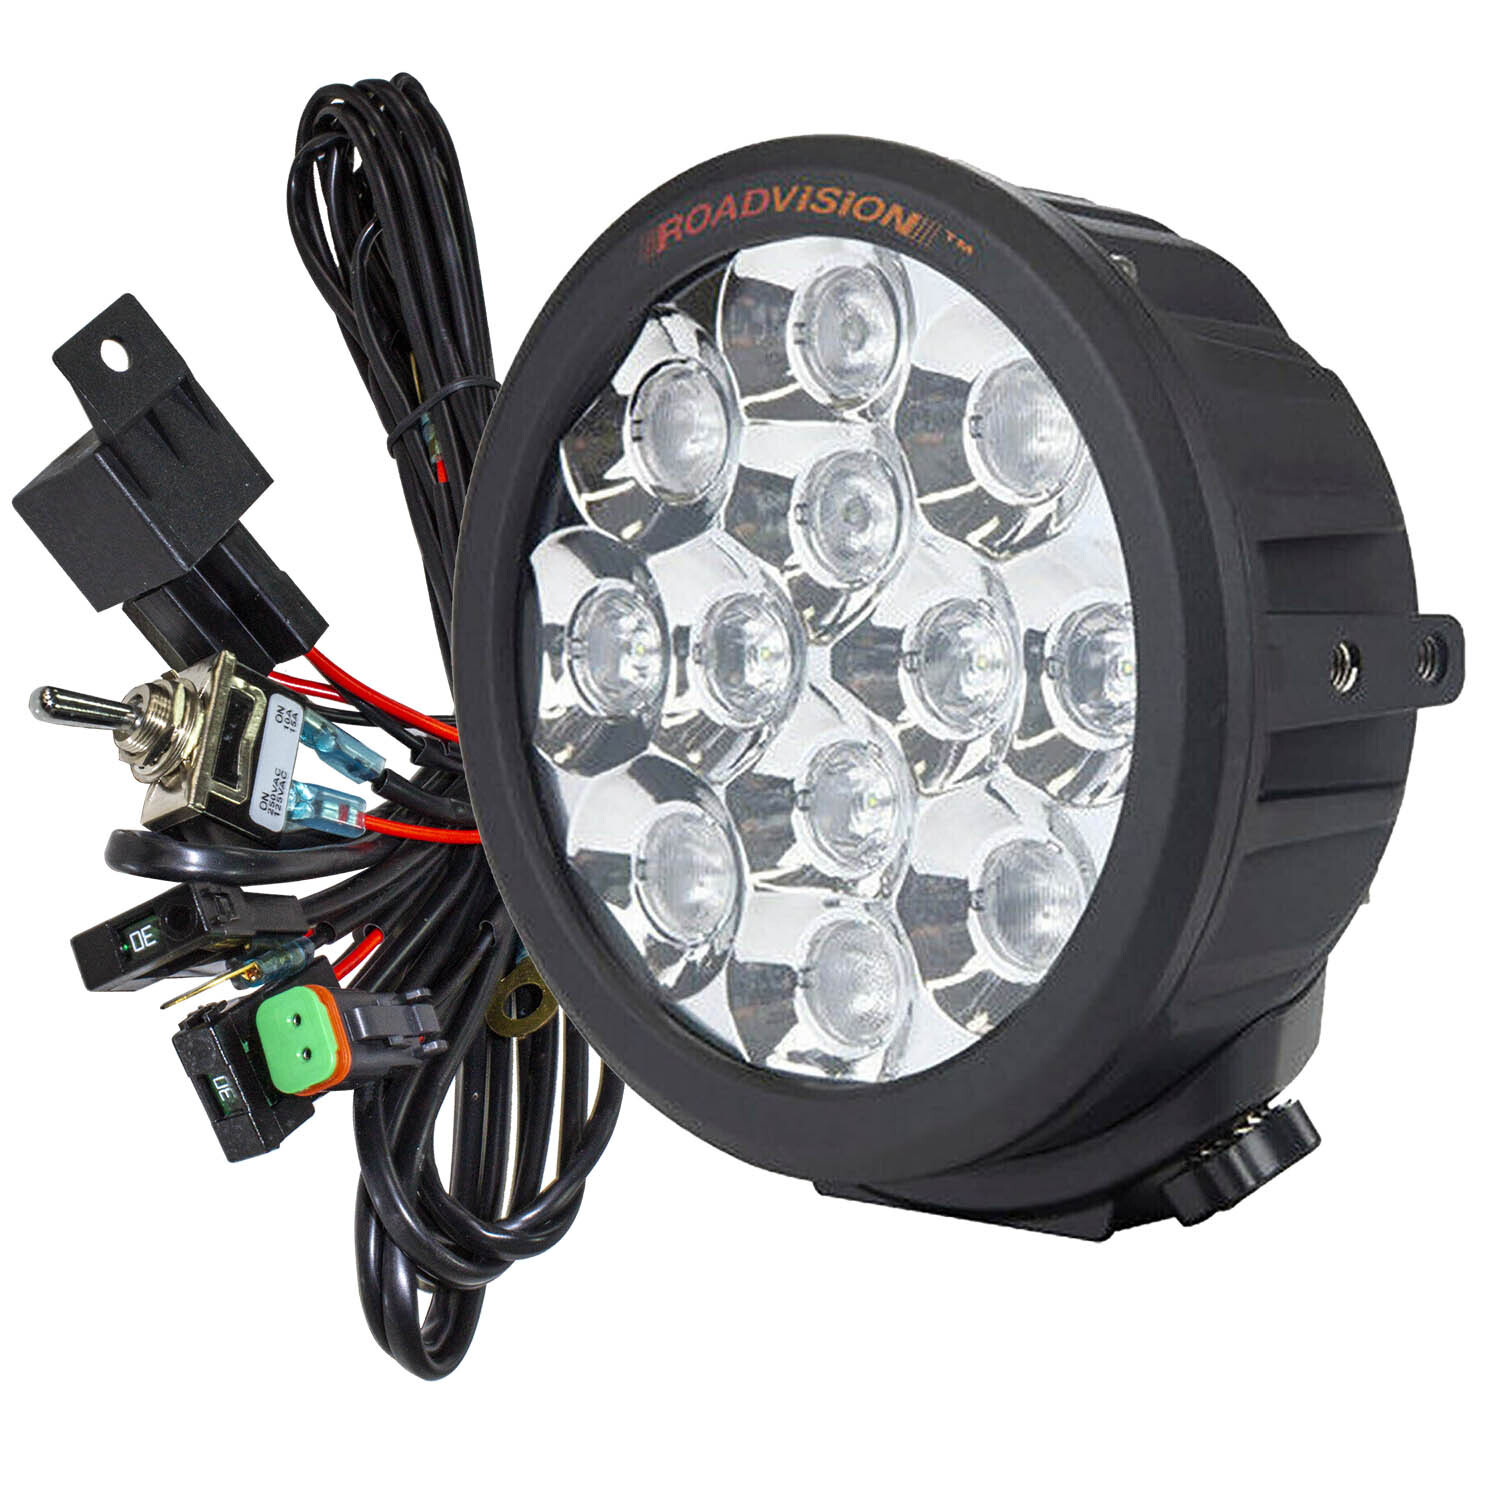 Roadvision 12 LED Driving Lamp 180mm Spread Beam